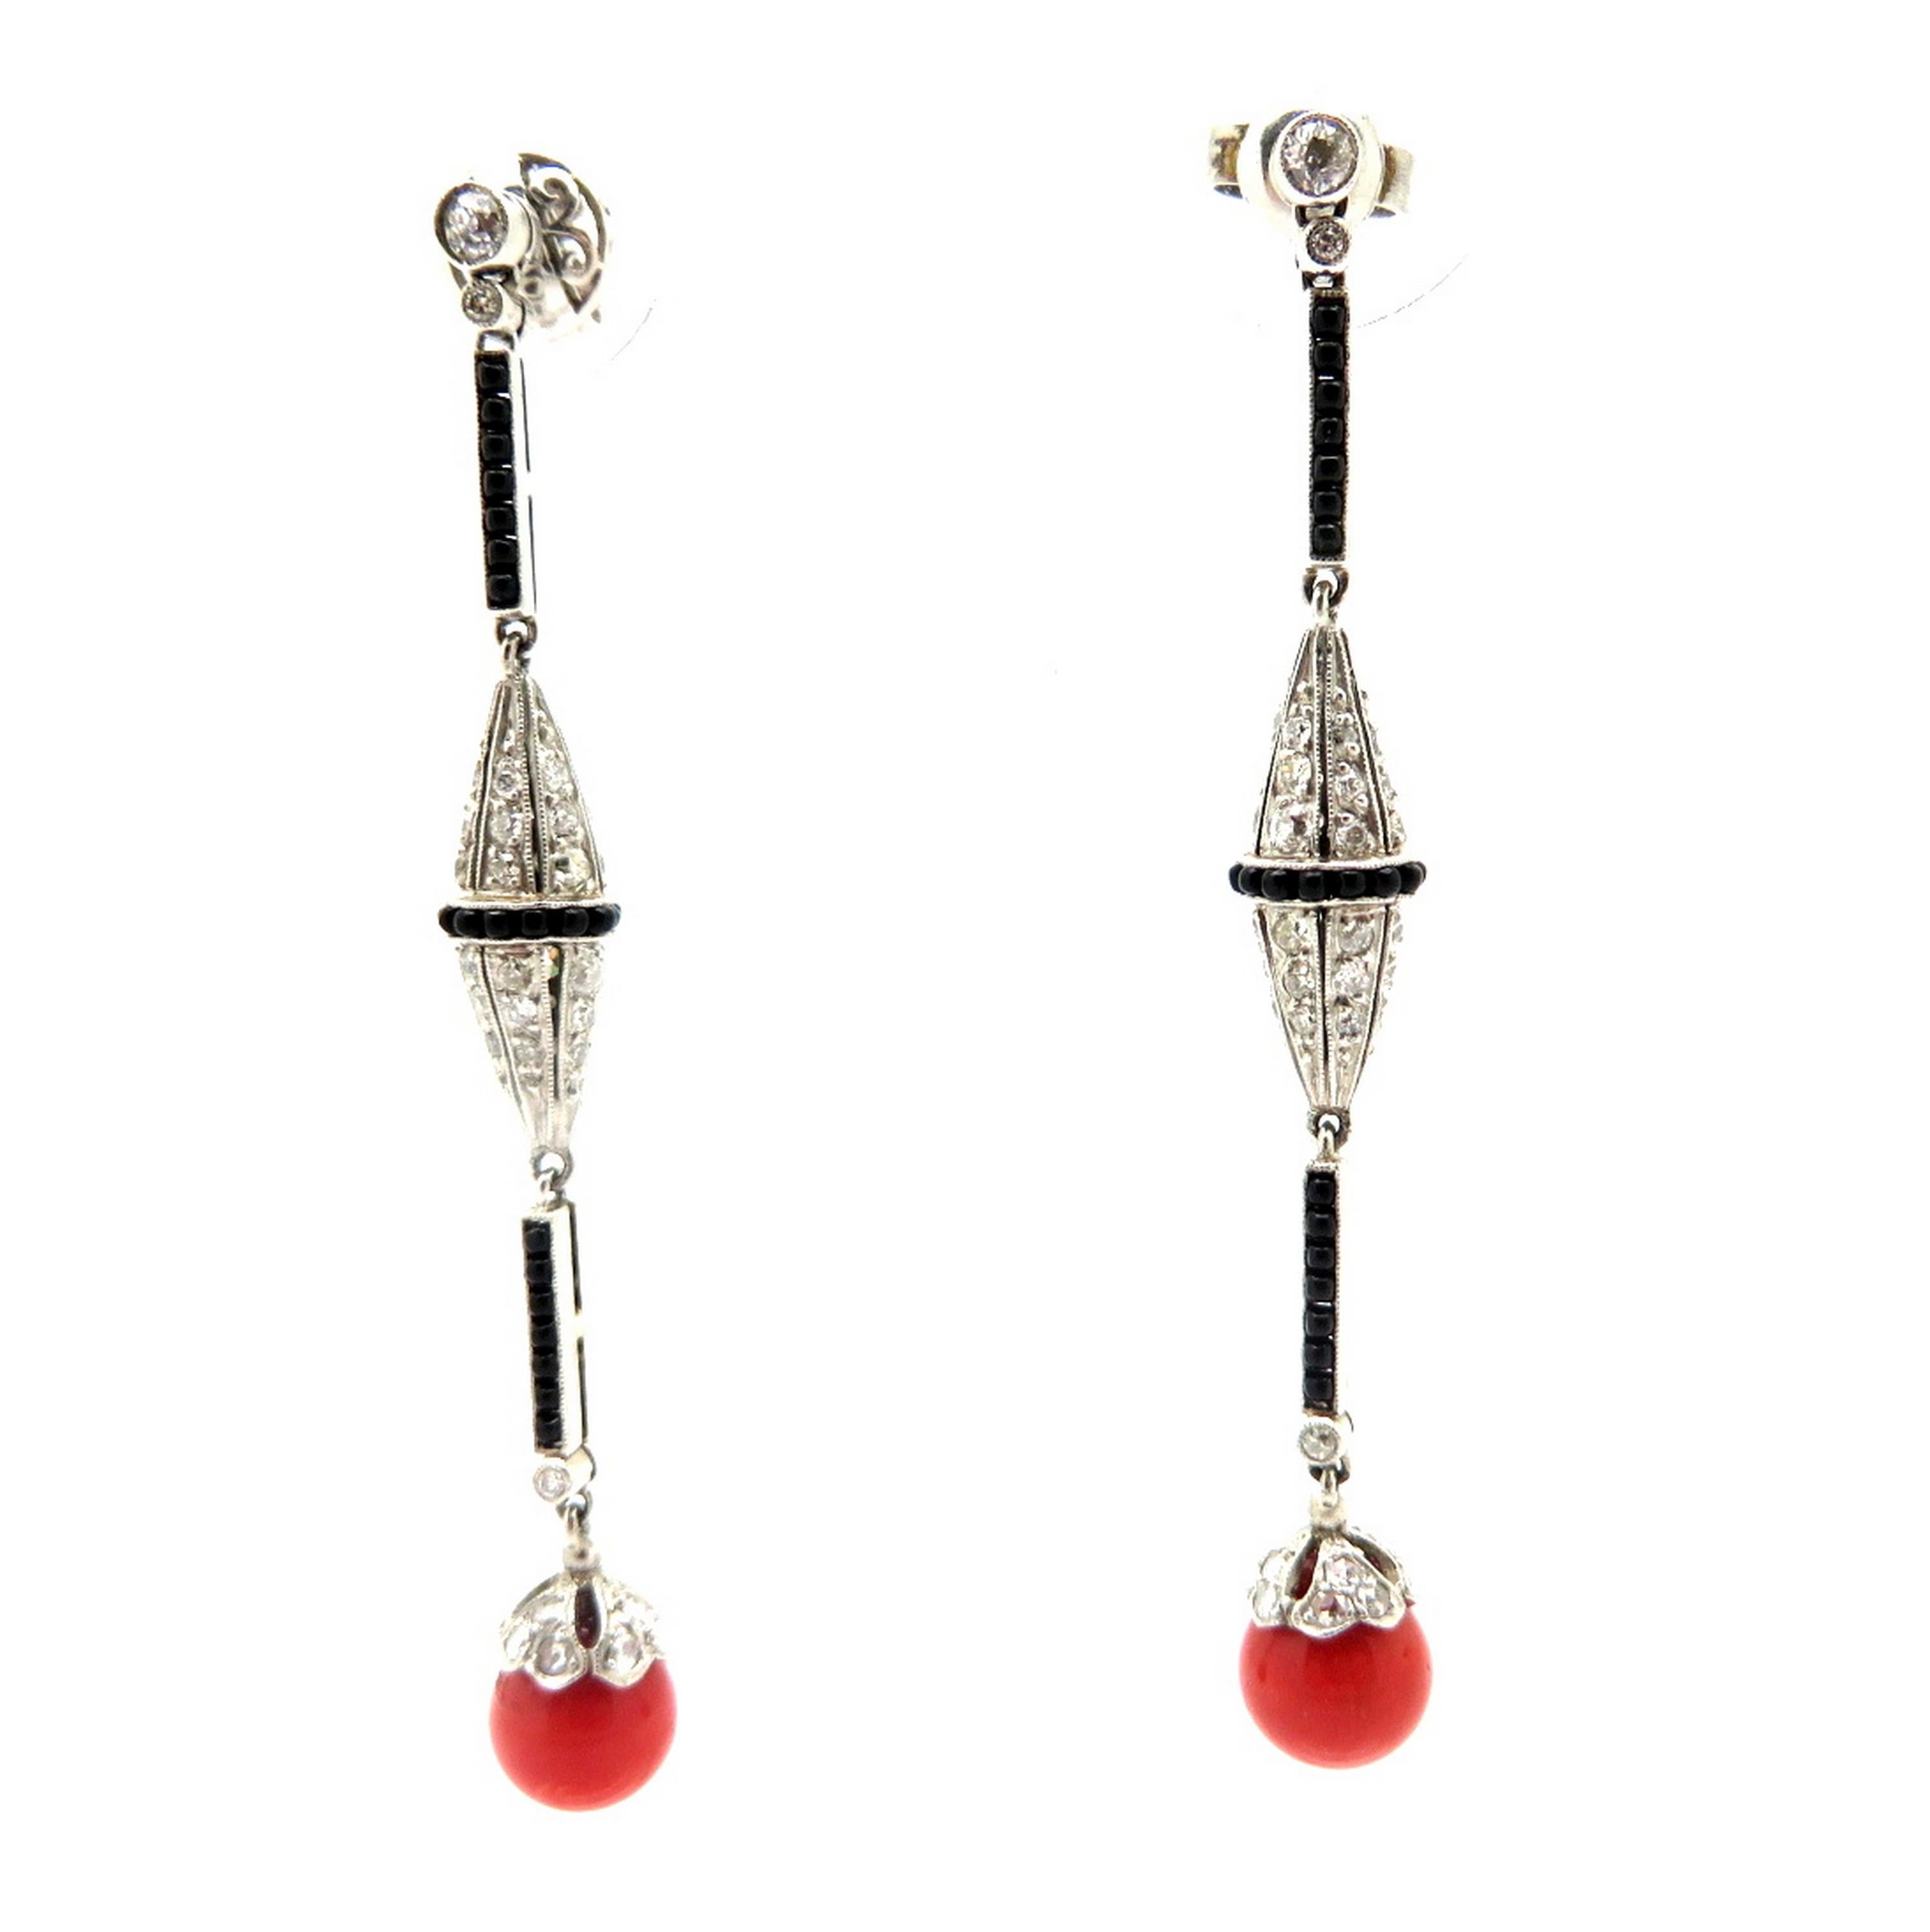 Platinum coral, onyx and Old Mine cut diamond Art Deco style chandelier dangle earrings. Showcasing numerous Old Mine cut diamonds with various measurements weighing a combined total of approximately 2.00 carats. Accented with two coral round beads